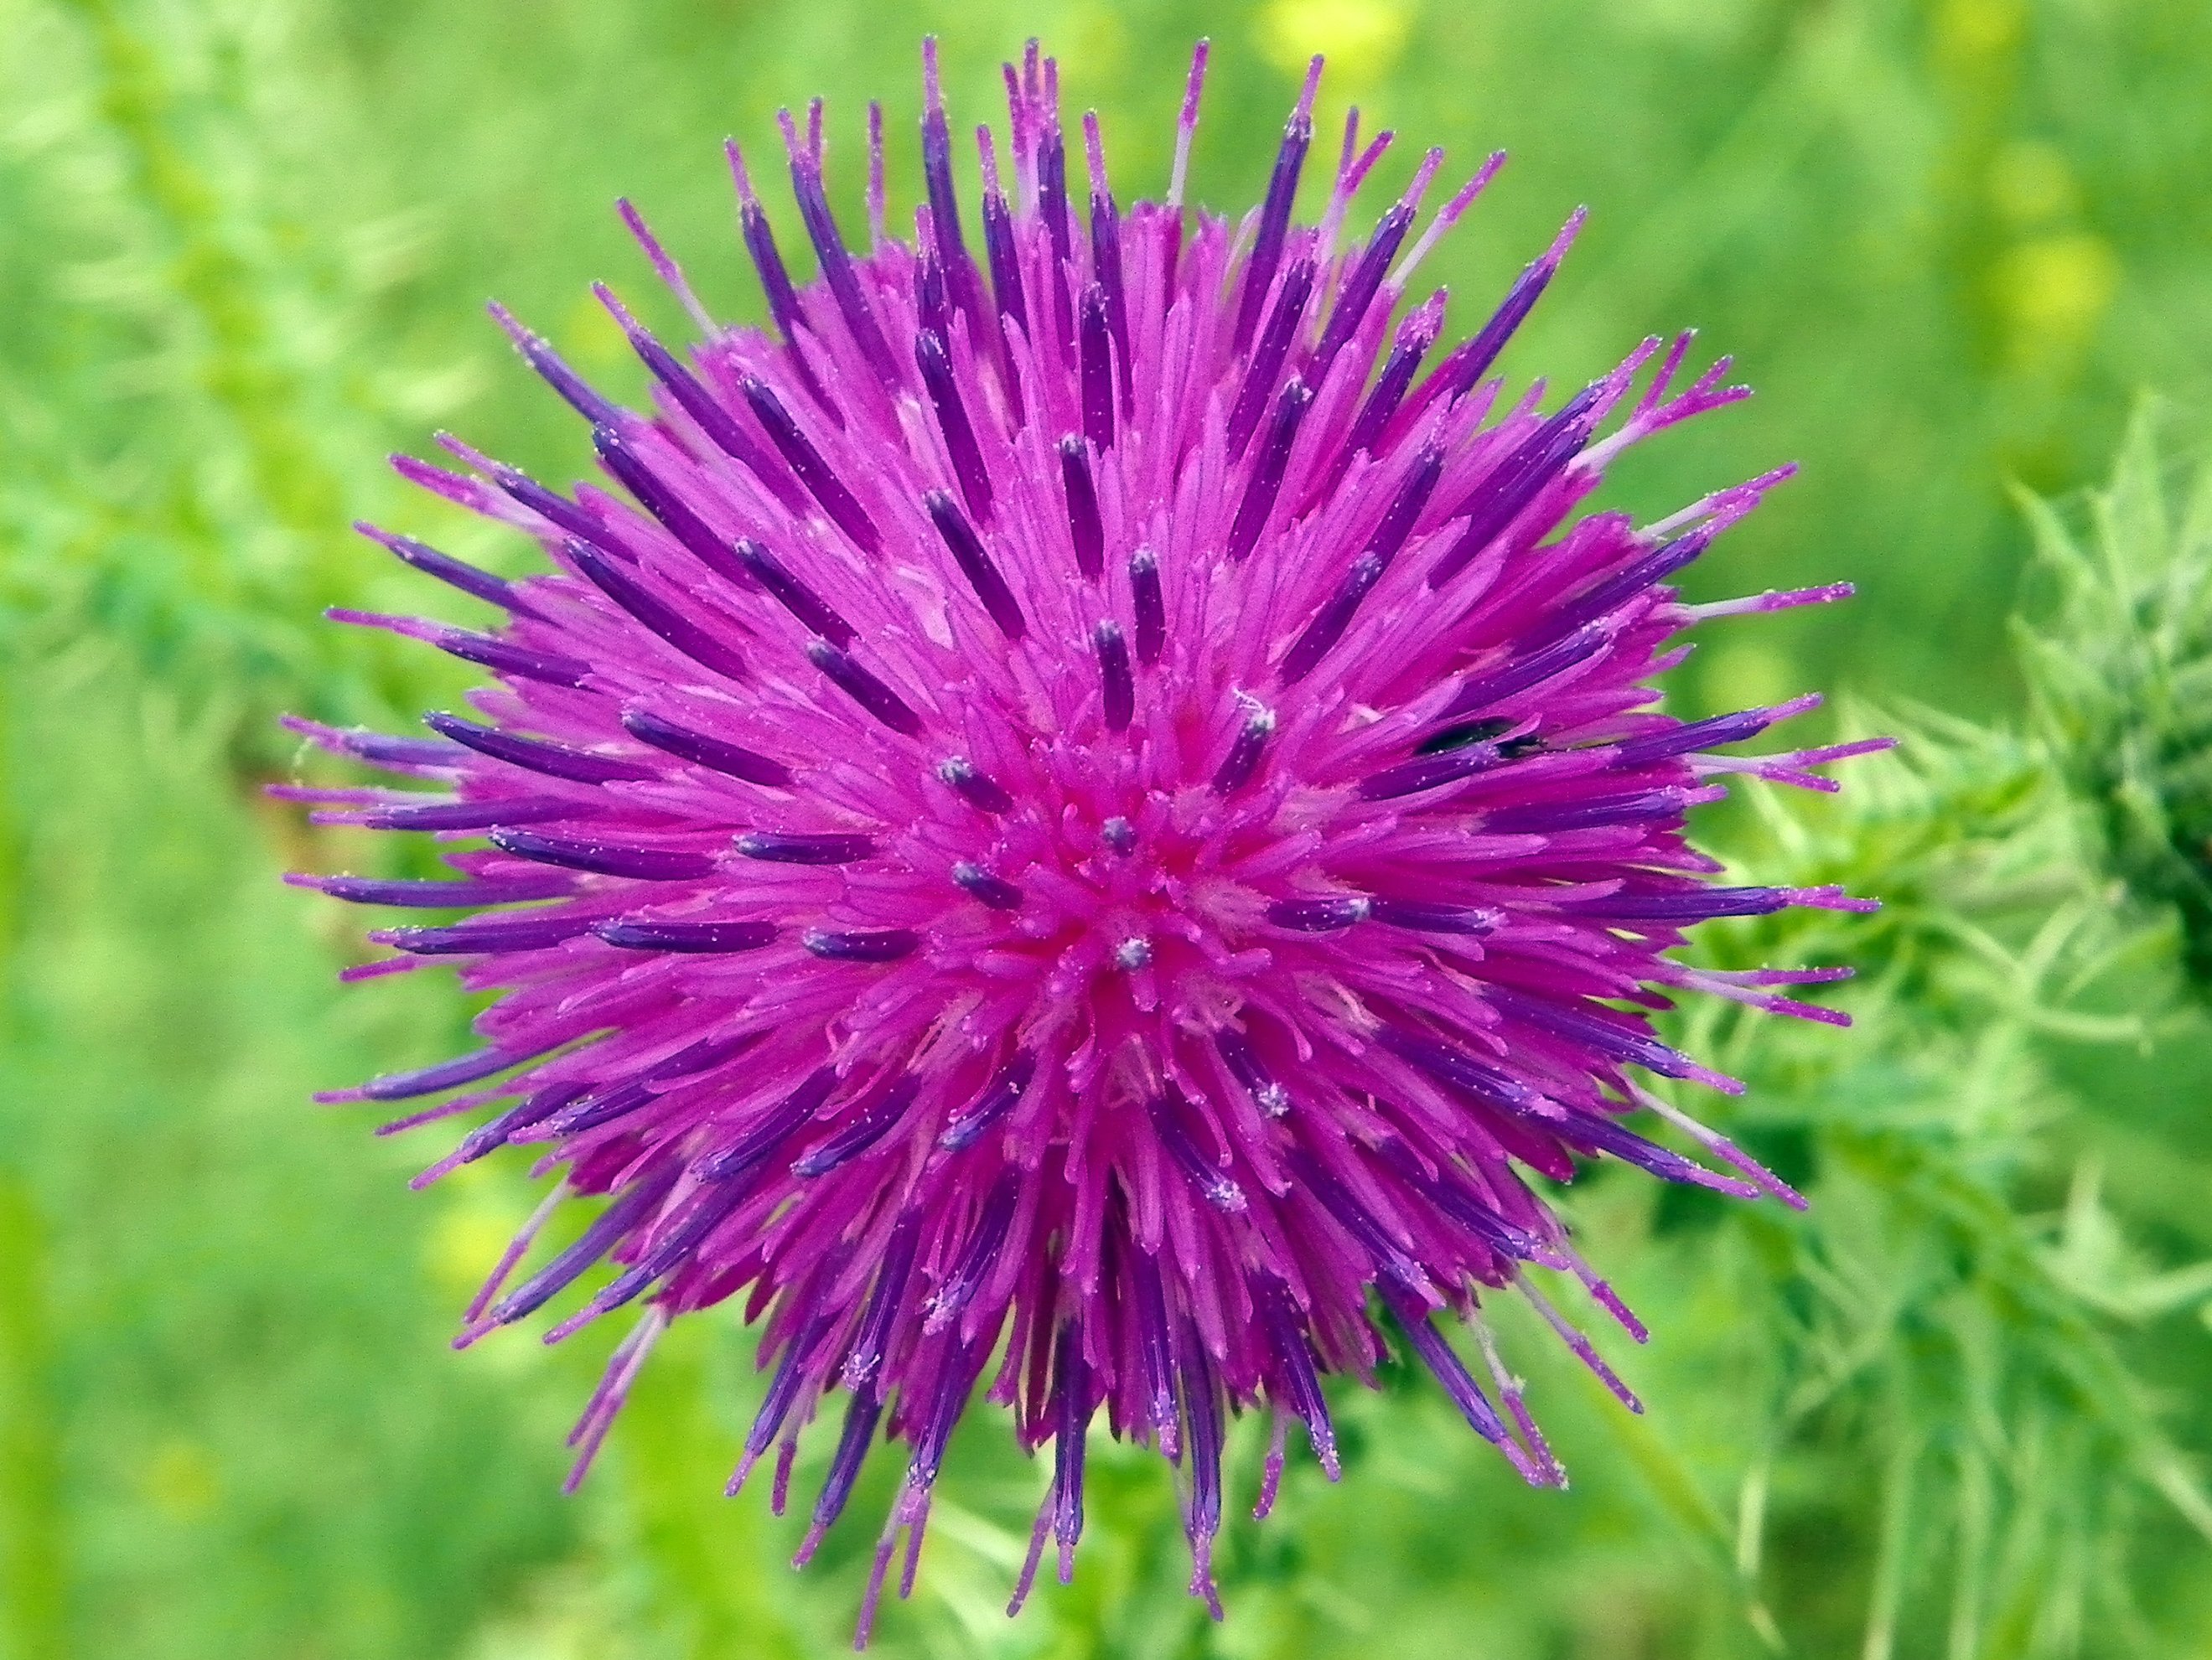 File:Welted Thistle Carduus crispus.jpg - Wikimedia Commons